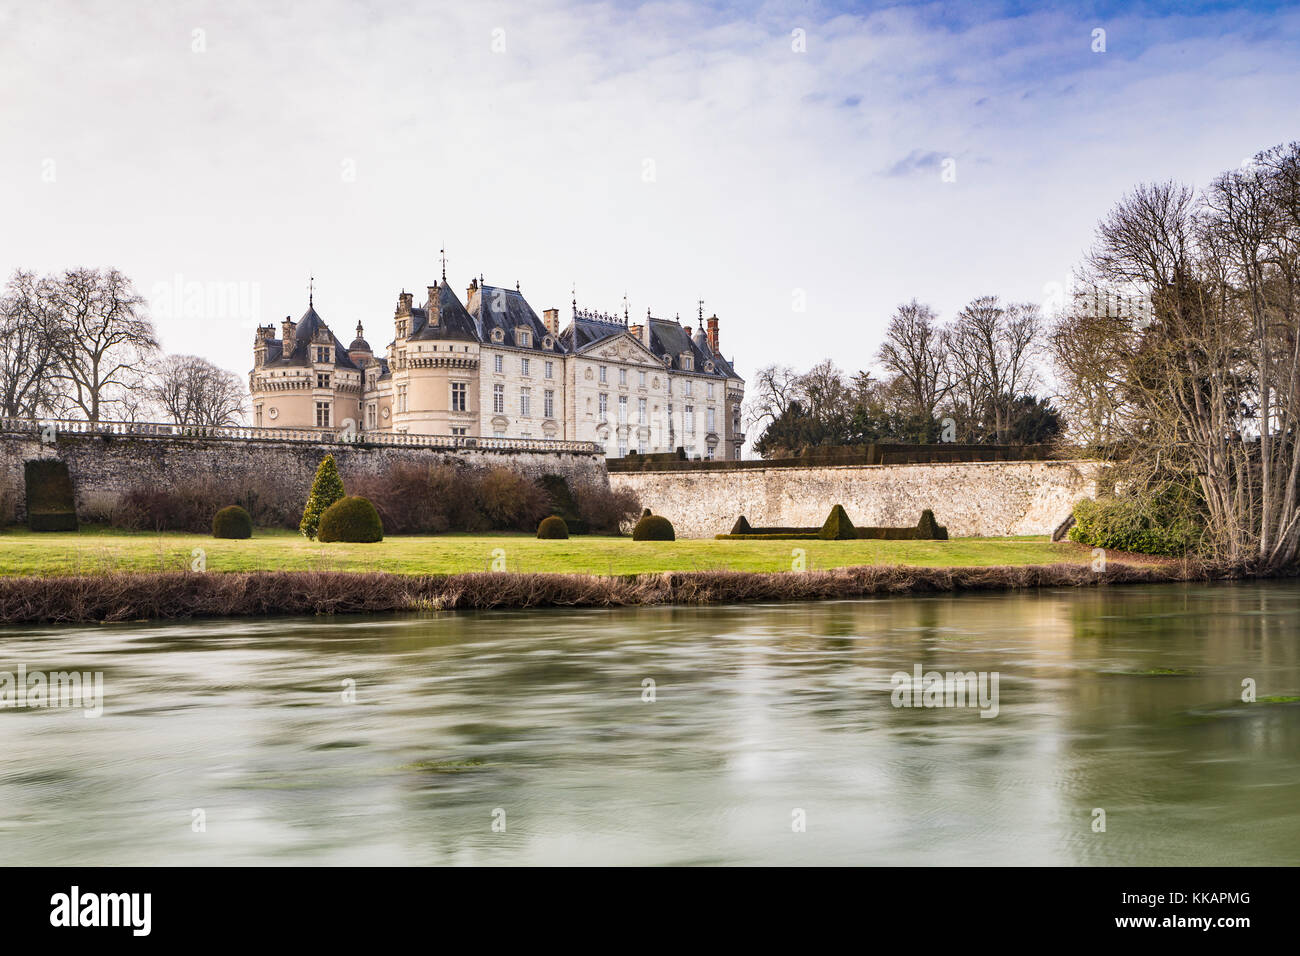 The Chateau du Lude in the Loire Valley, France, Europe Stock Photo